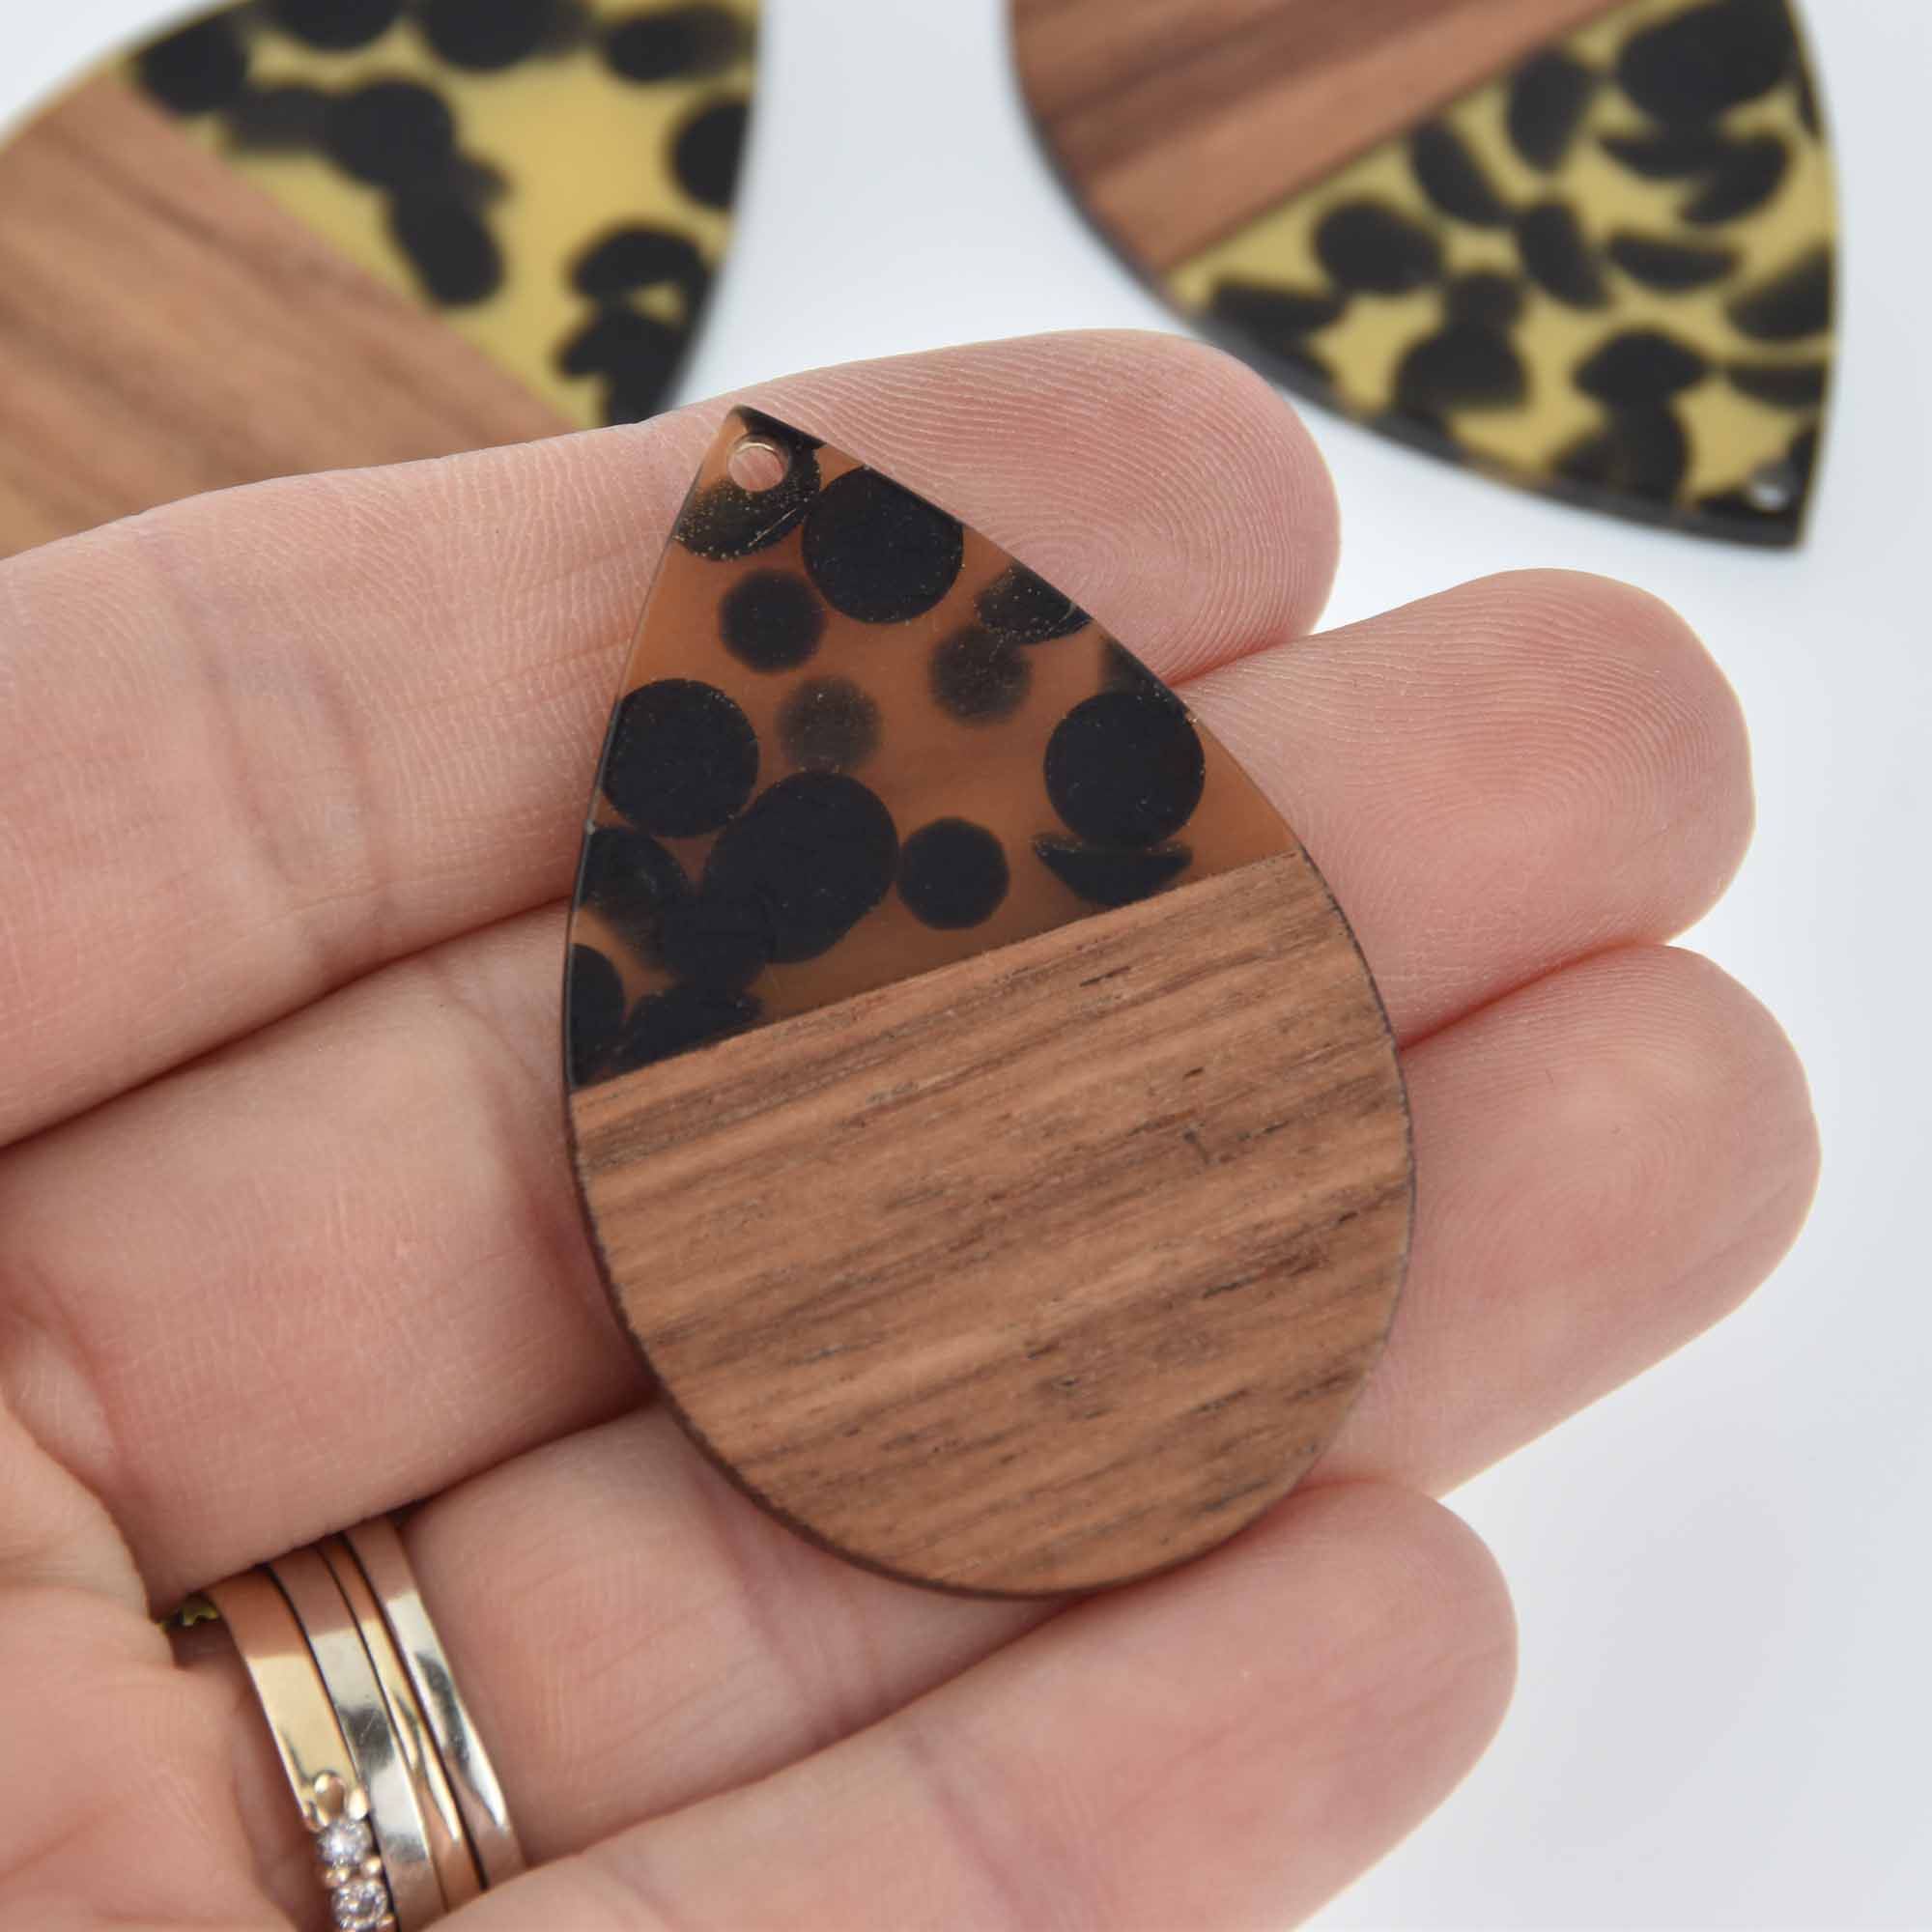 2 Teardrop Charms, Brown and Black Speckled Resin with Real Wood, 47mm long, chs7825